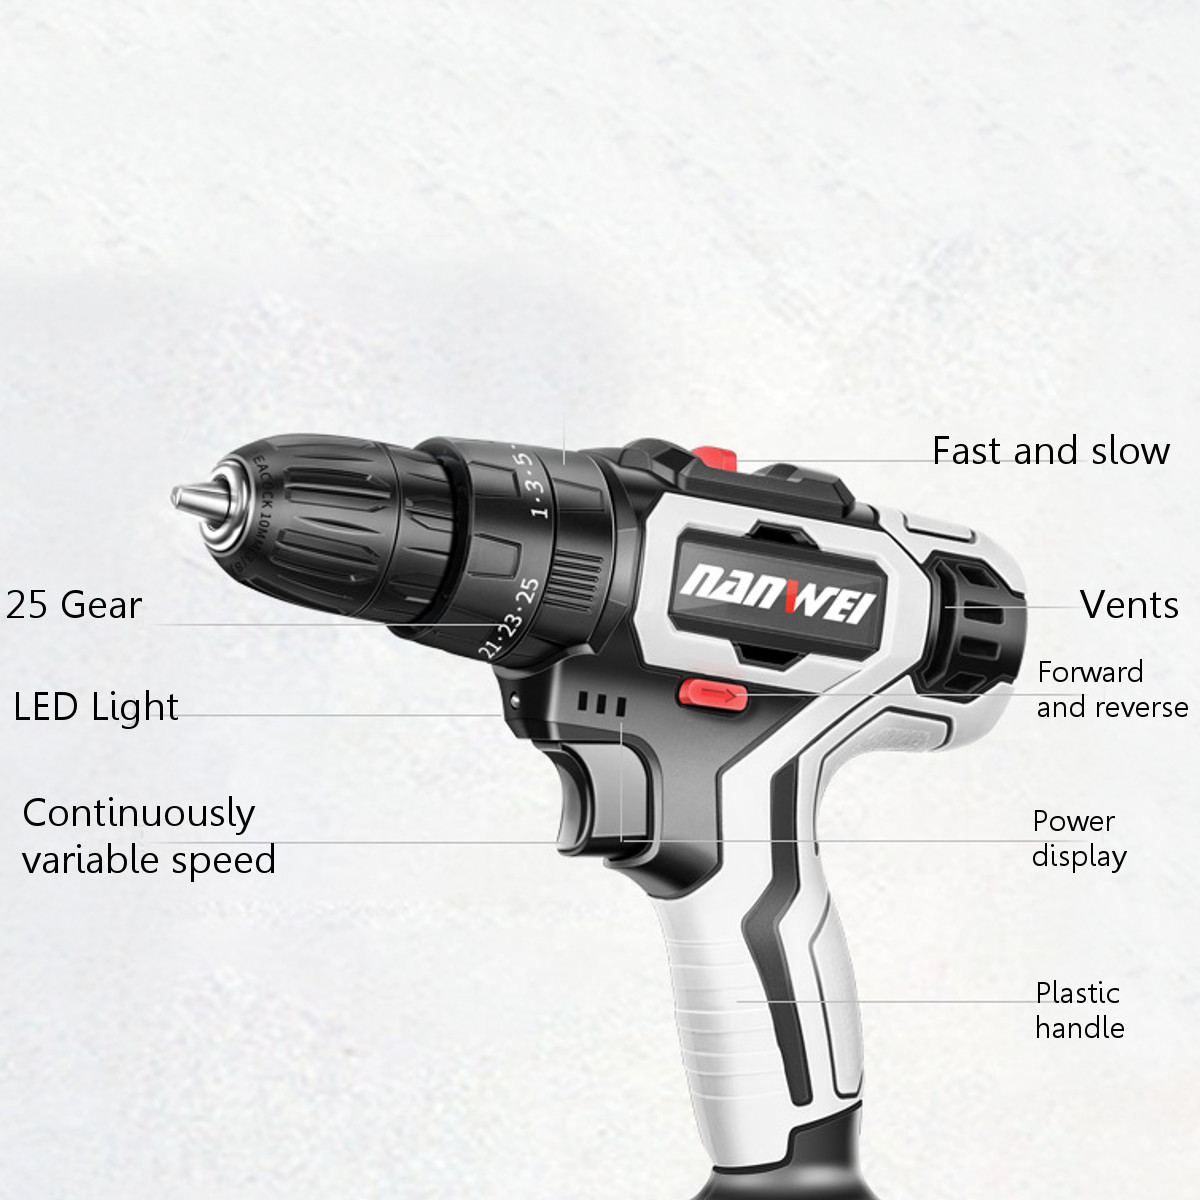 12V-1500mAH-25NM-Rechargeable-Cordless-Drill-2-Speeds-Electric-Screwdriver-Power-Tool-1736770-9